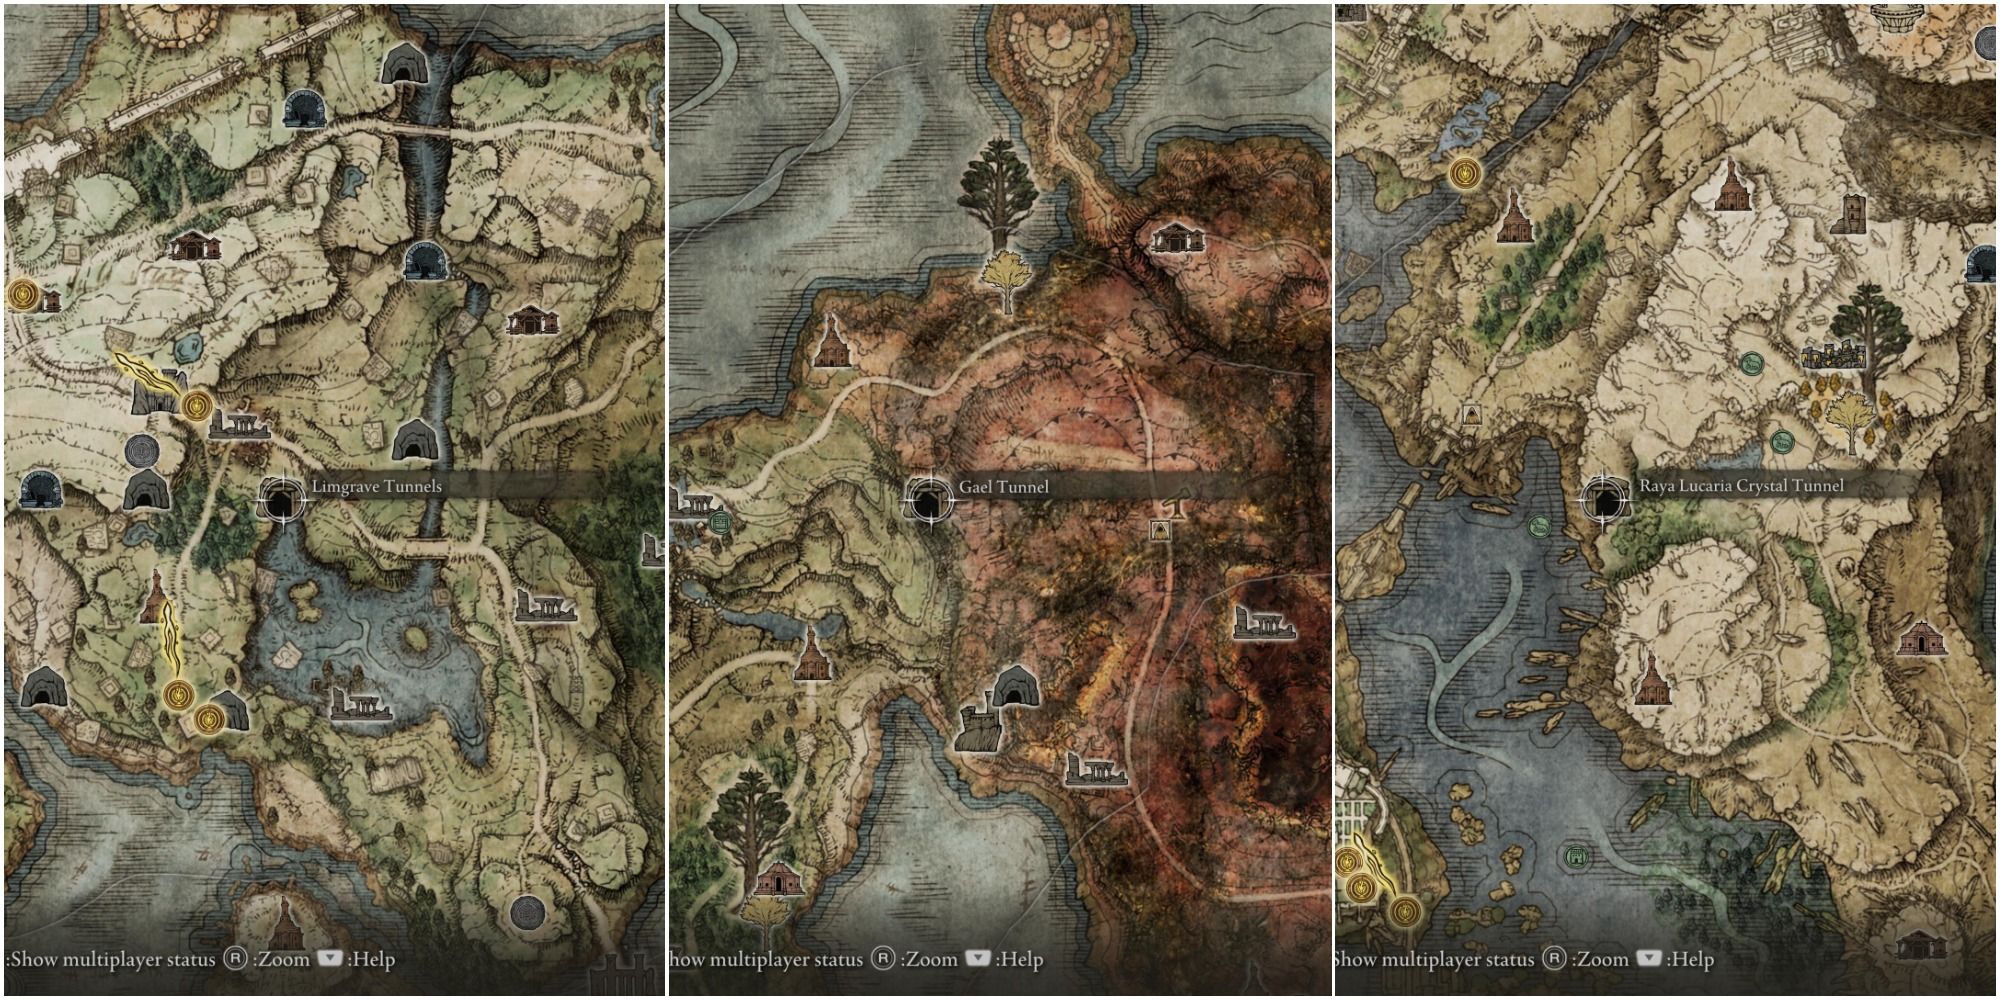 Elden Ring - collage of mining tunnel map locations